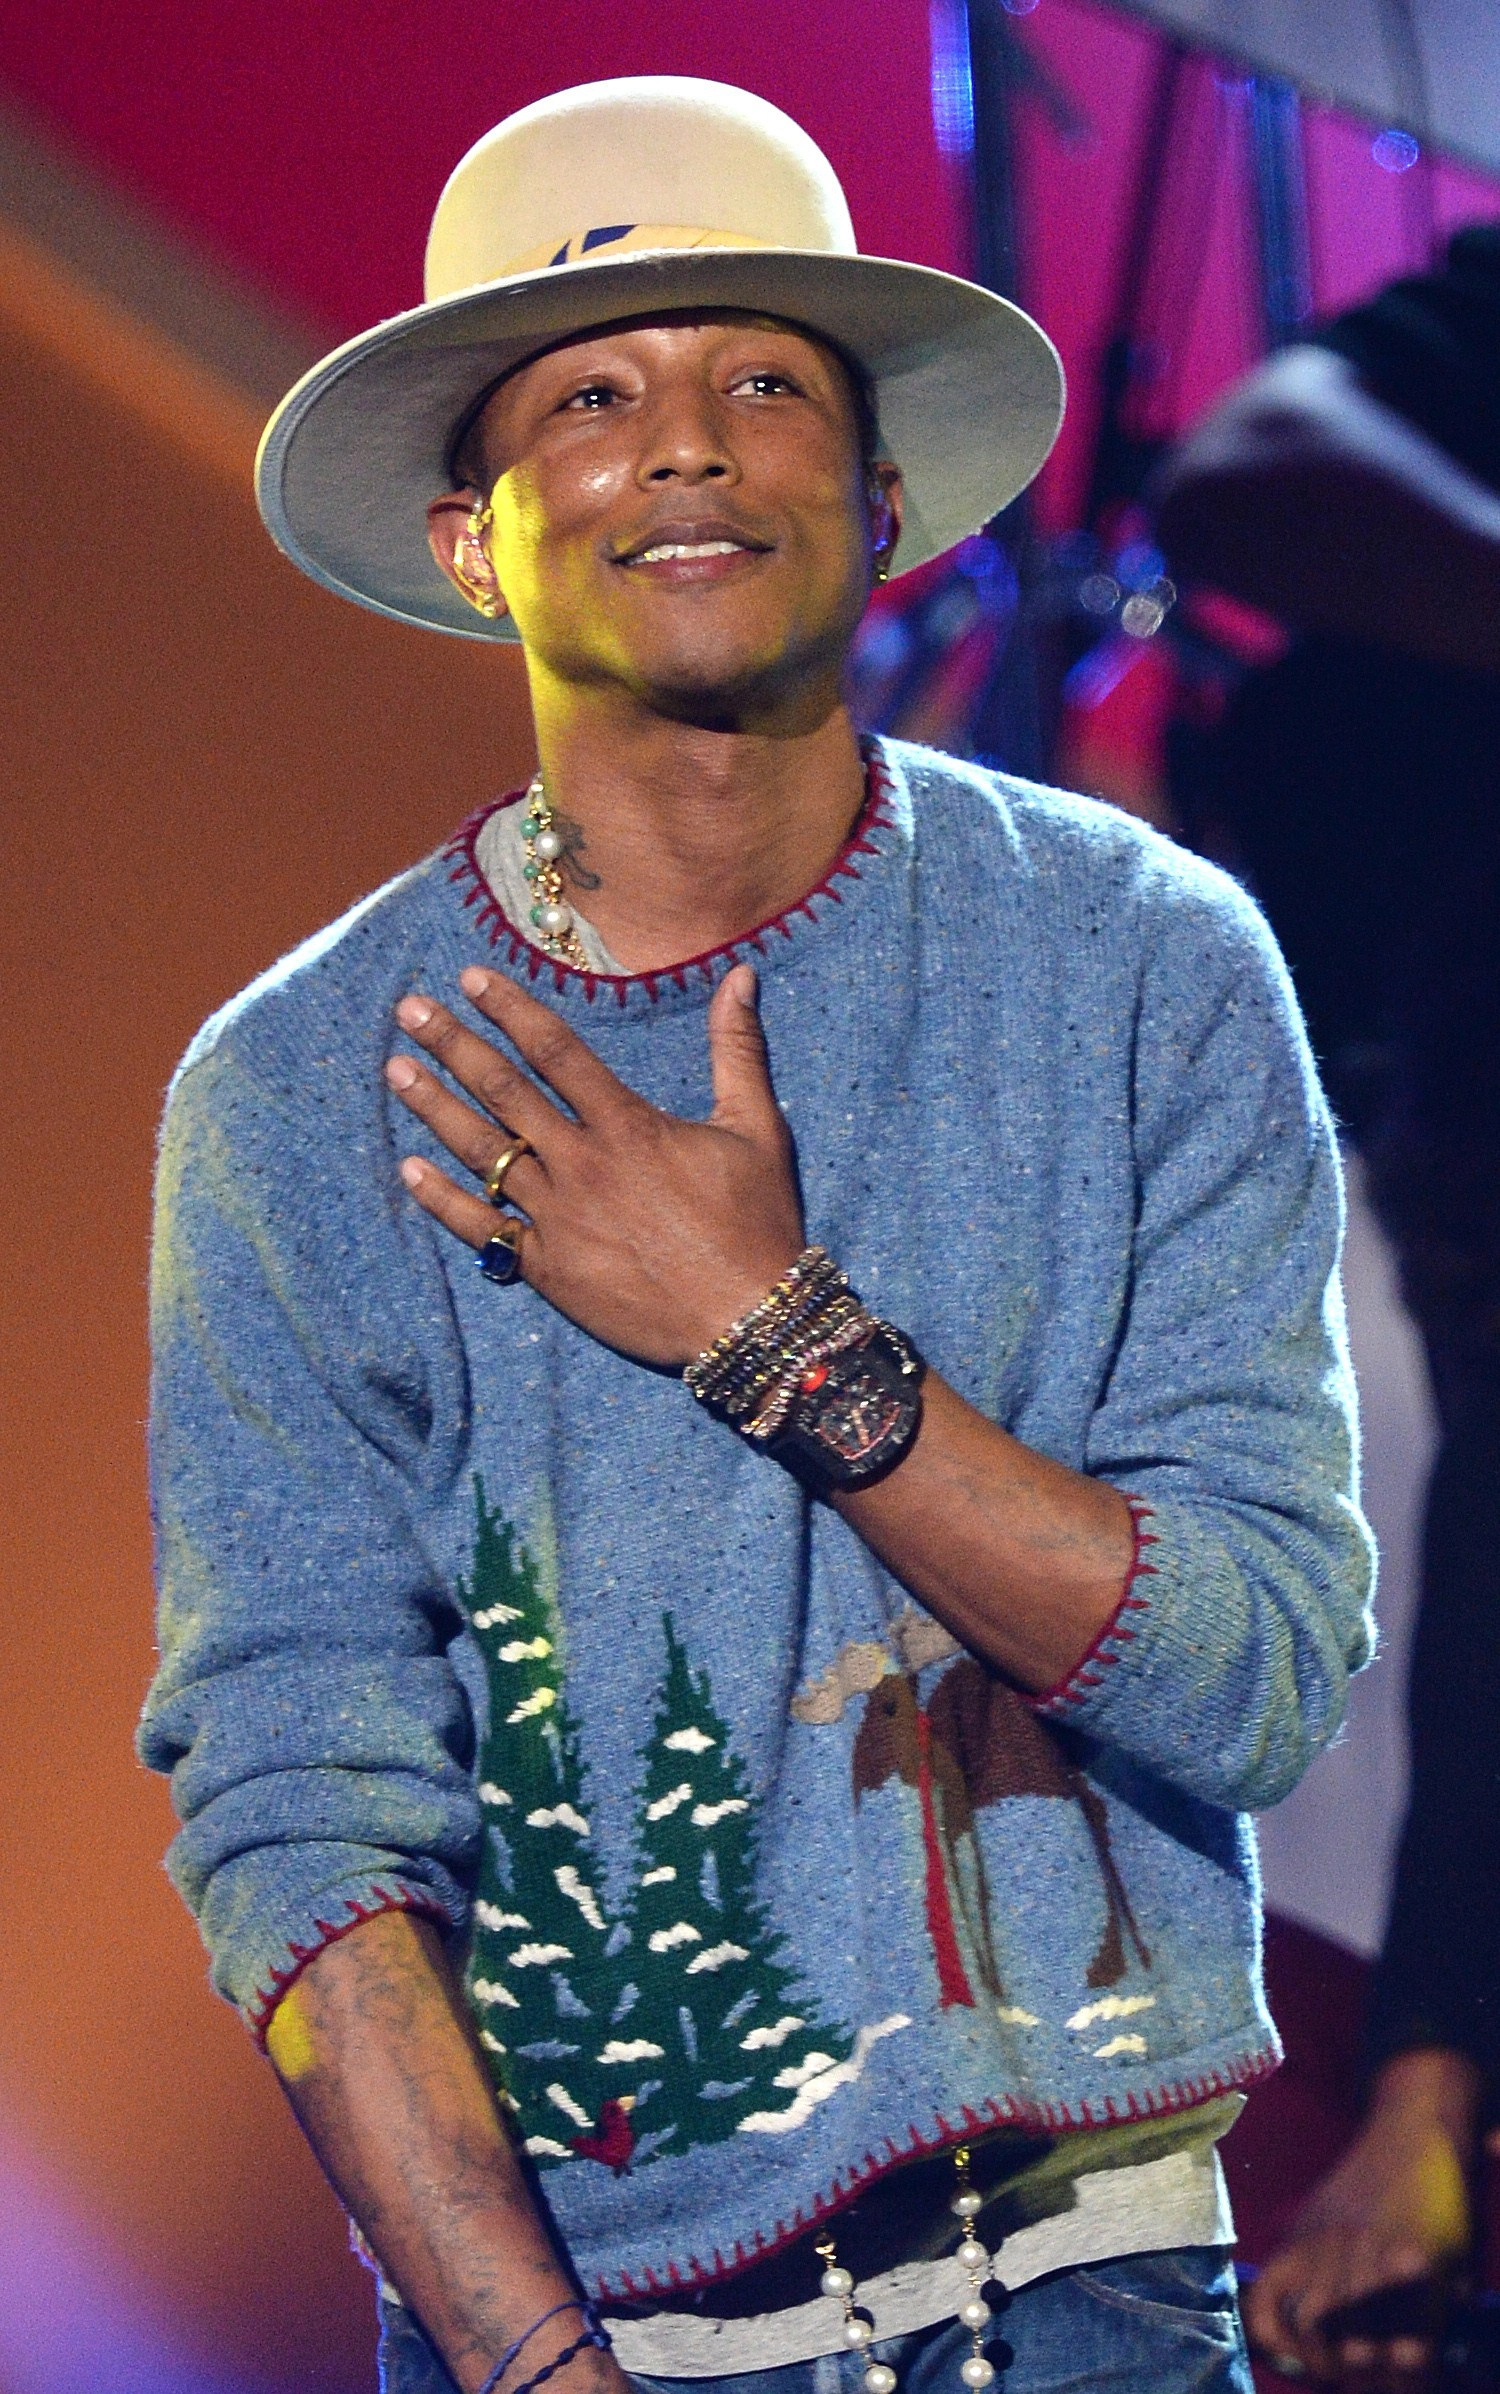 HD wallpaper, A Feminist After, Hes A Feminist, Mobile Hd Pharrell Williams Background Photo, Pharrell Williams, Feminism Singer, 1500X2400 Hd Phone